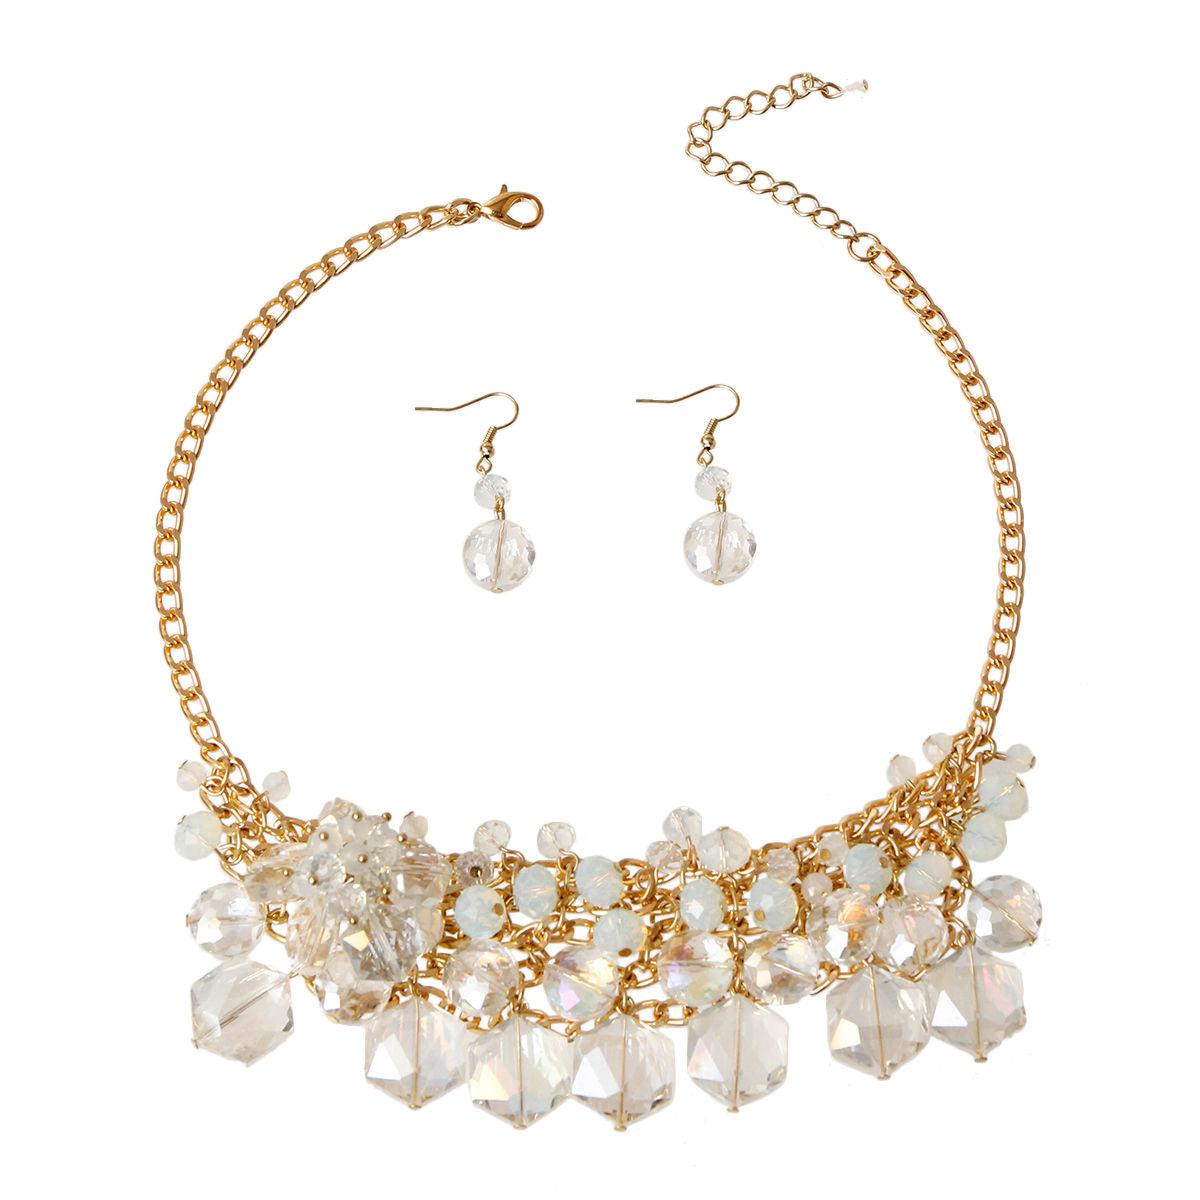 Necklace Set with Clustered Clear Beads and Gold Plating